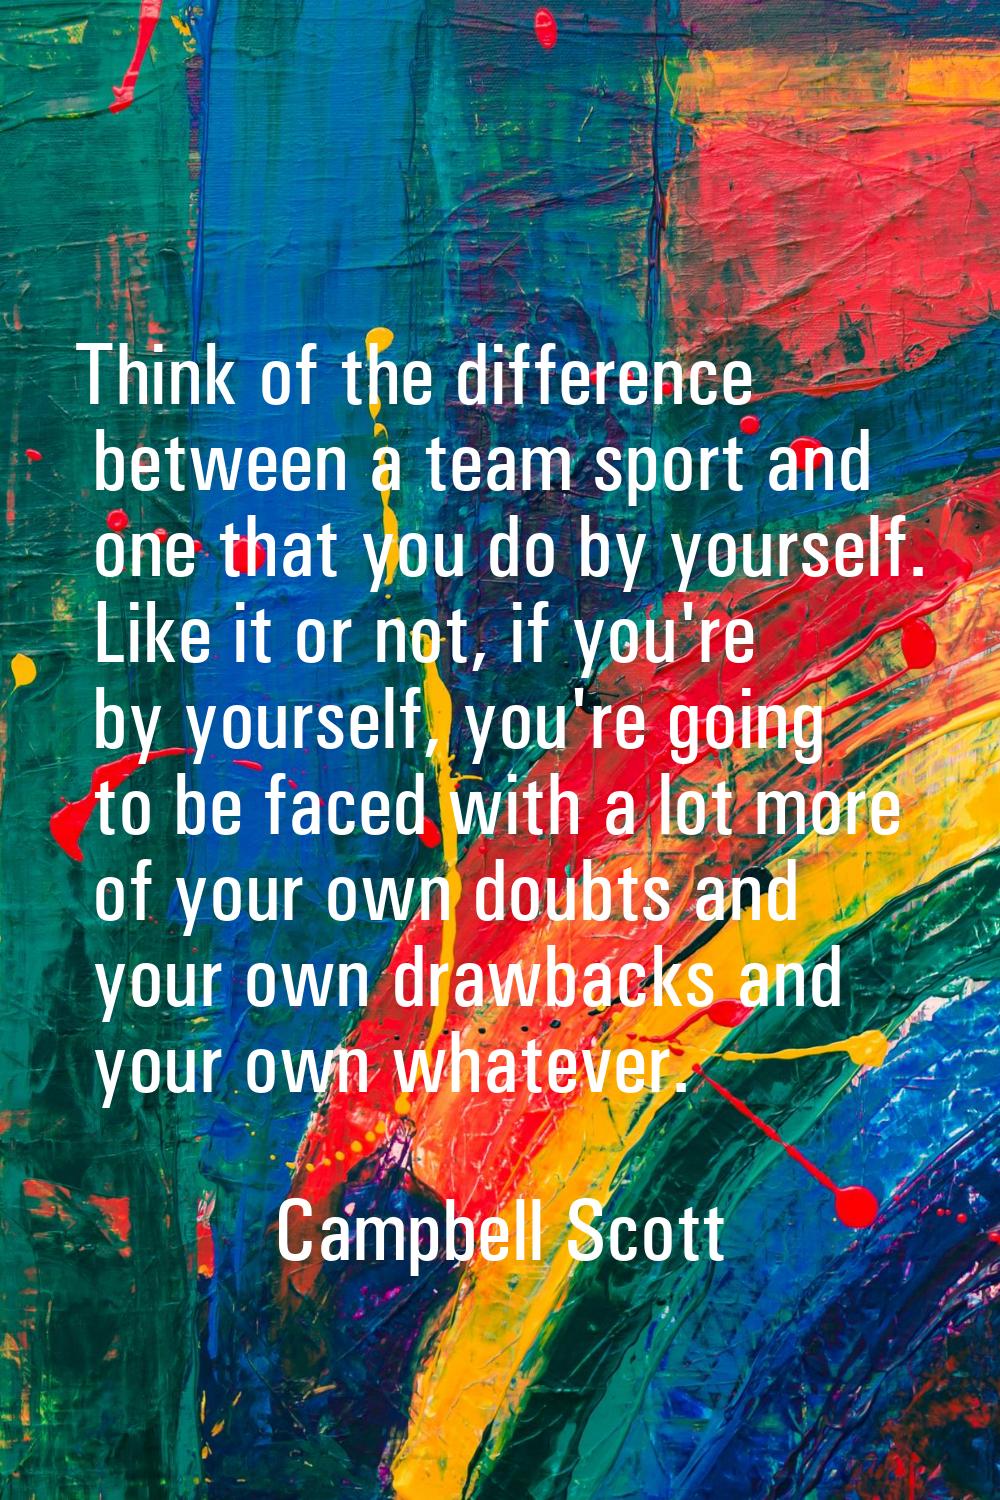 Think of the difference between a team sport and one that you do by yourself. Like it or not, if yo